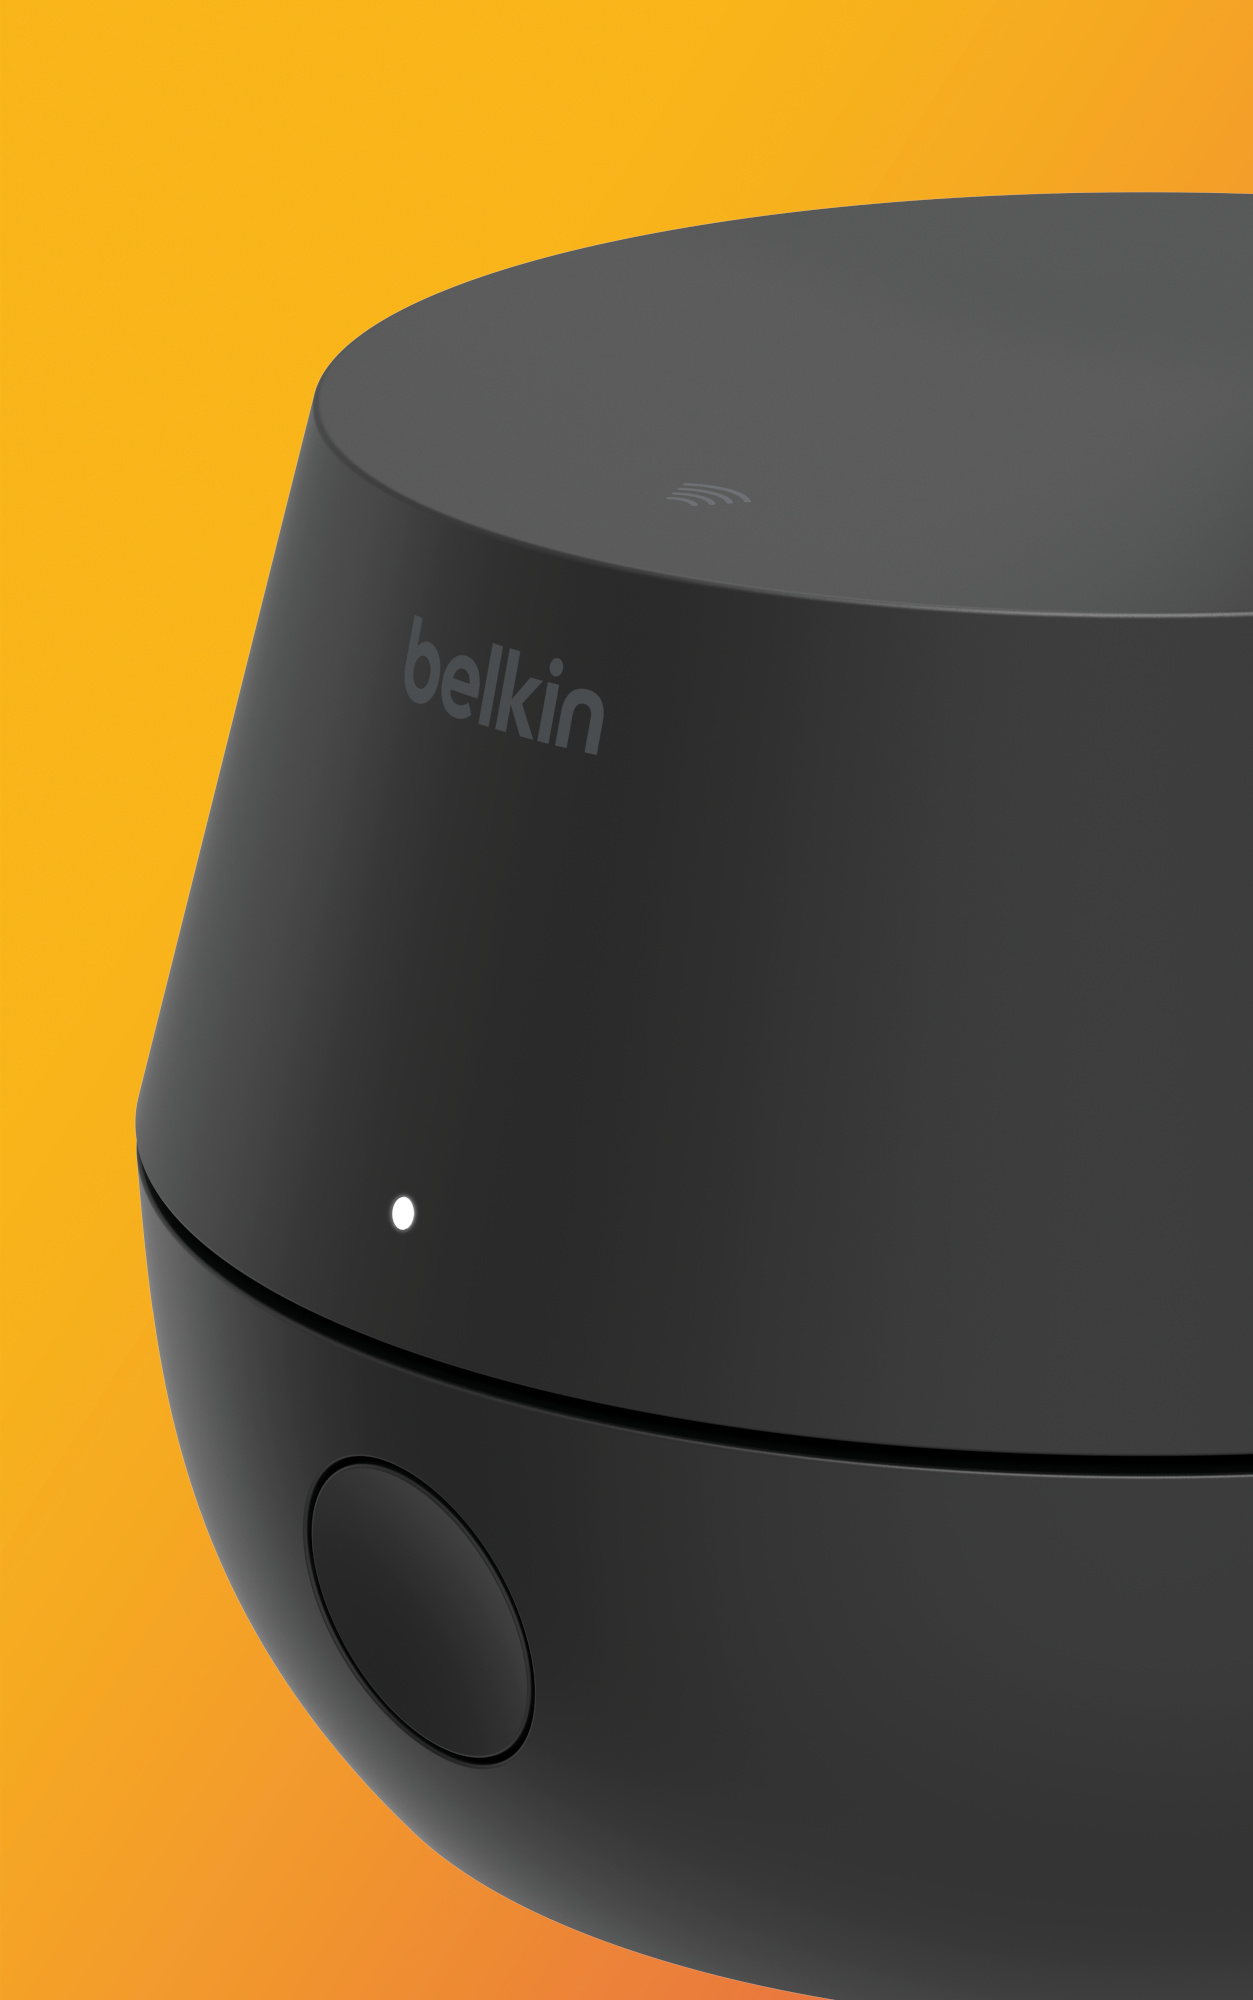 The Belkin Auto-Tracking Stand Pro's base unit.